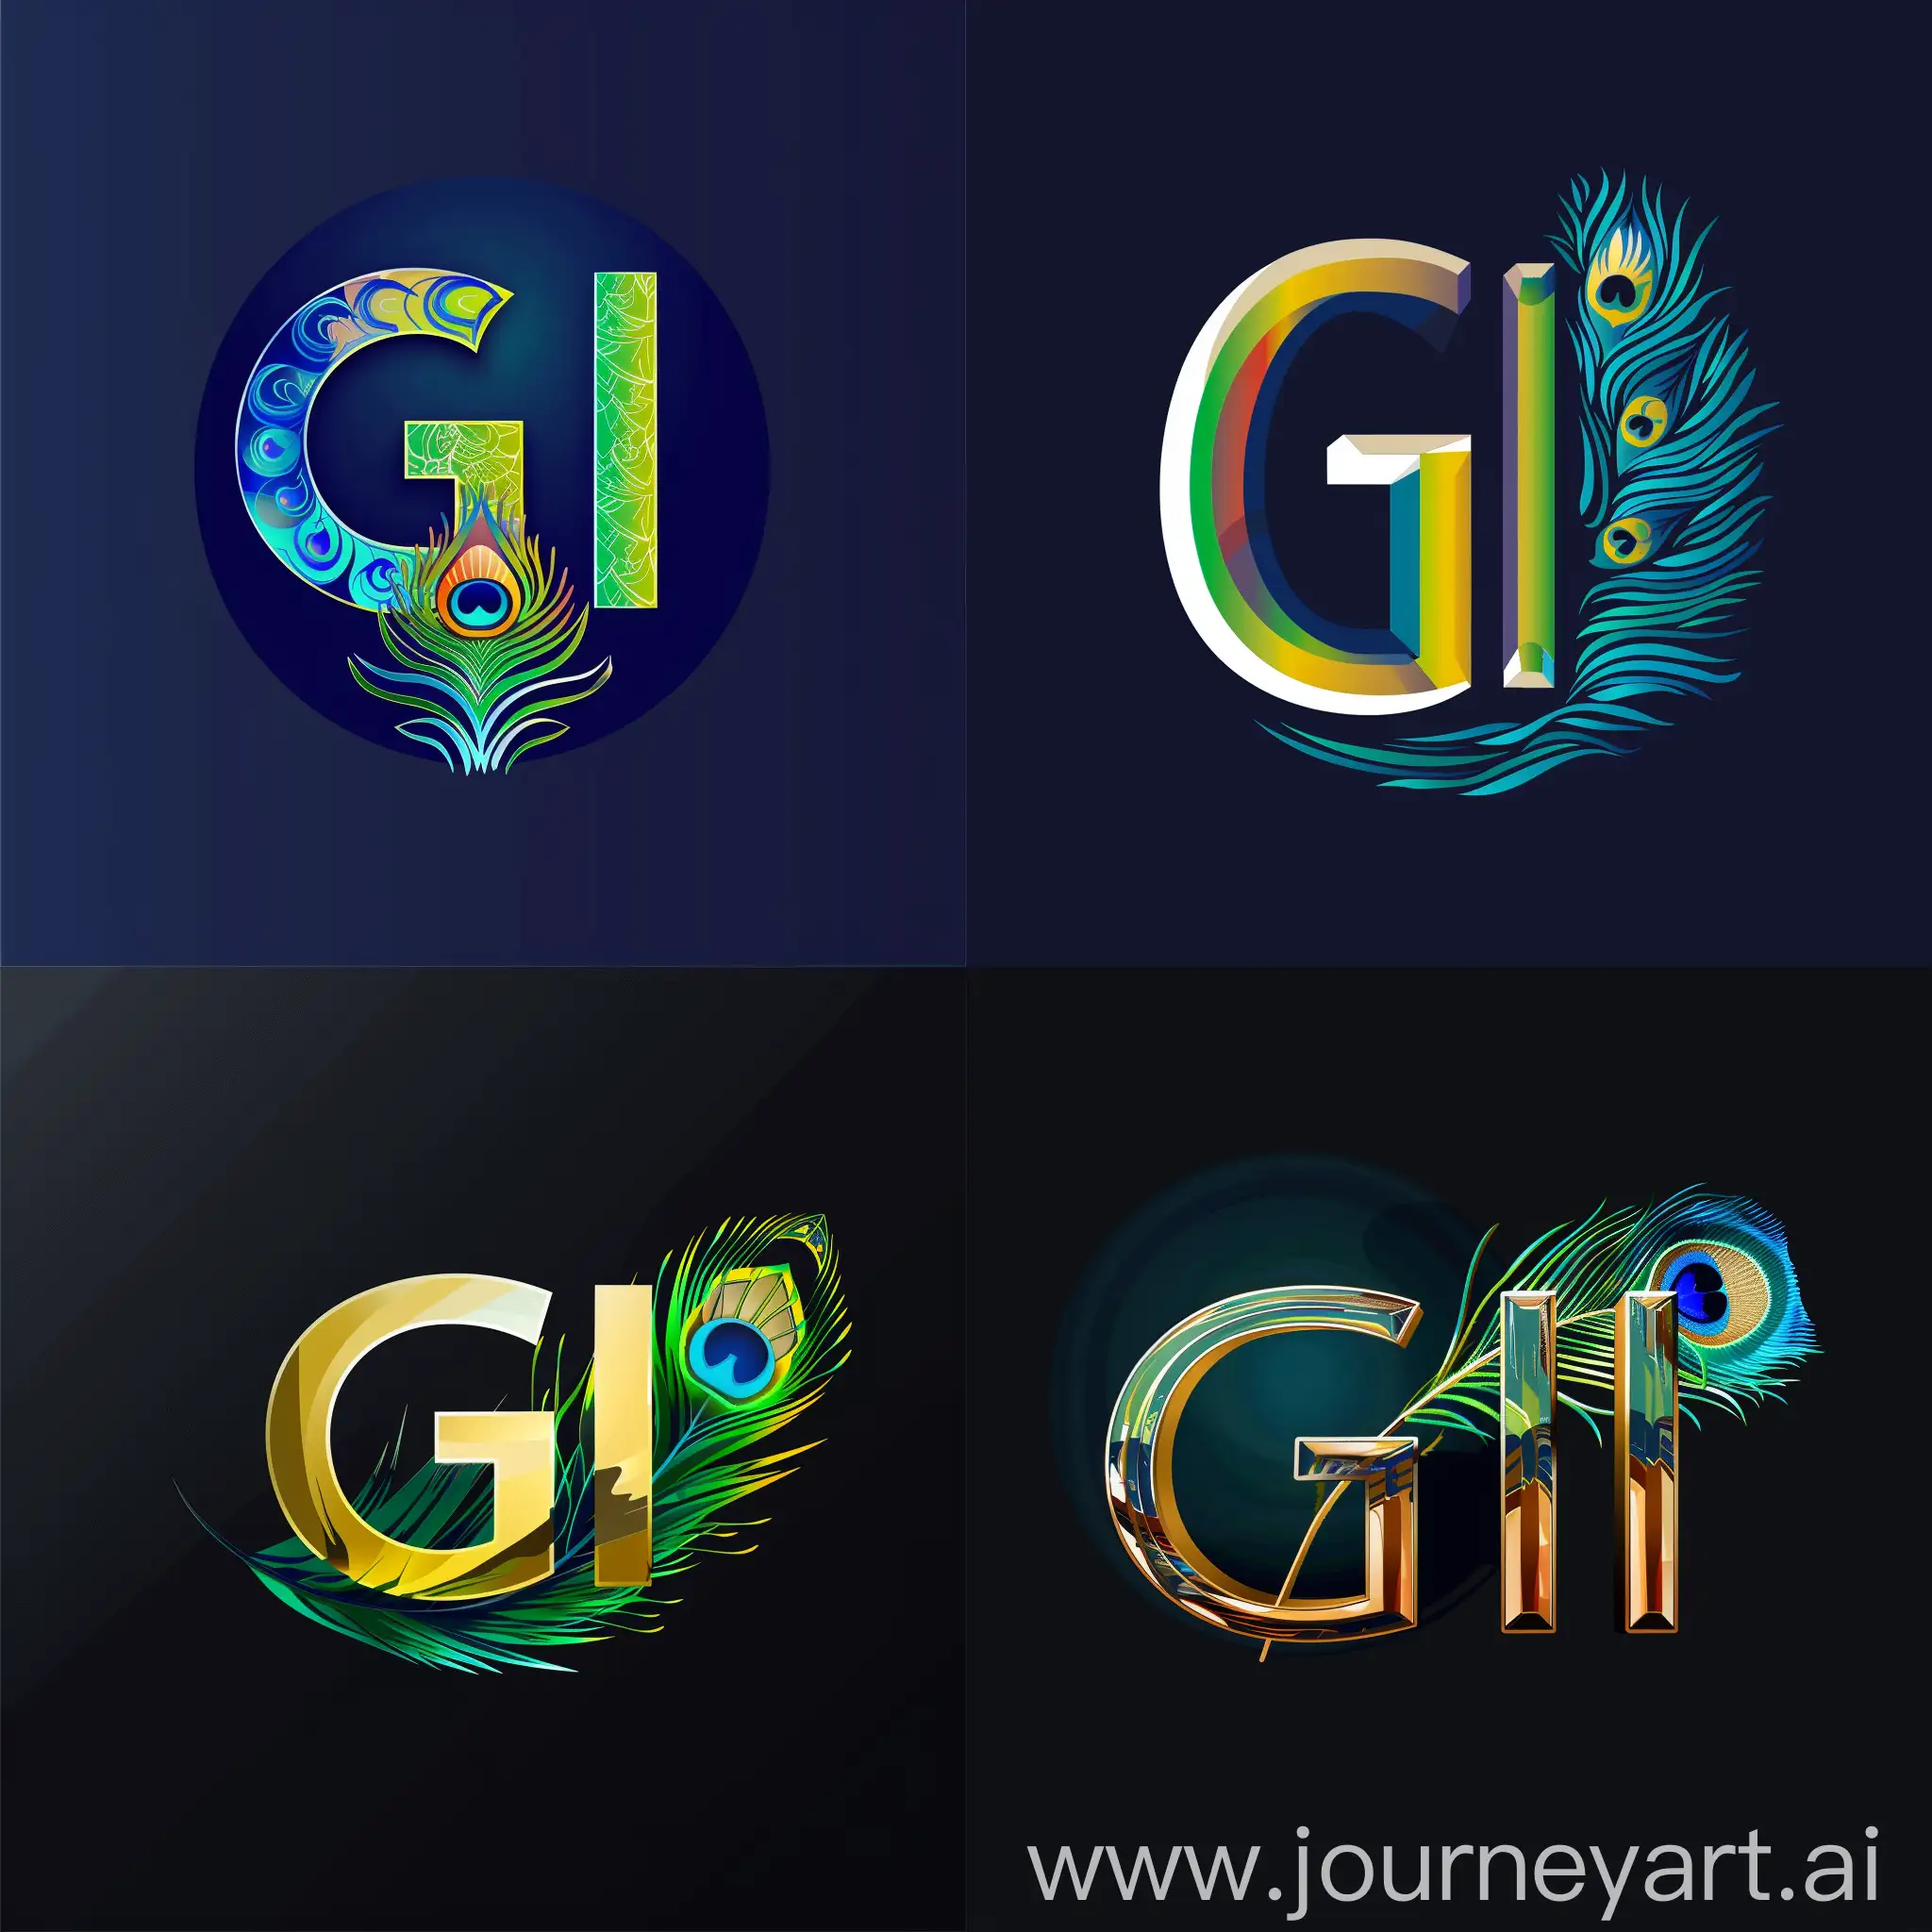 Elegant-IT-Company-Logo-with-GI-Letters-and-Peacock-Feather